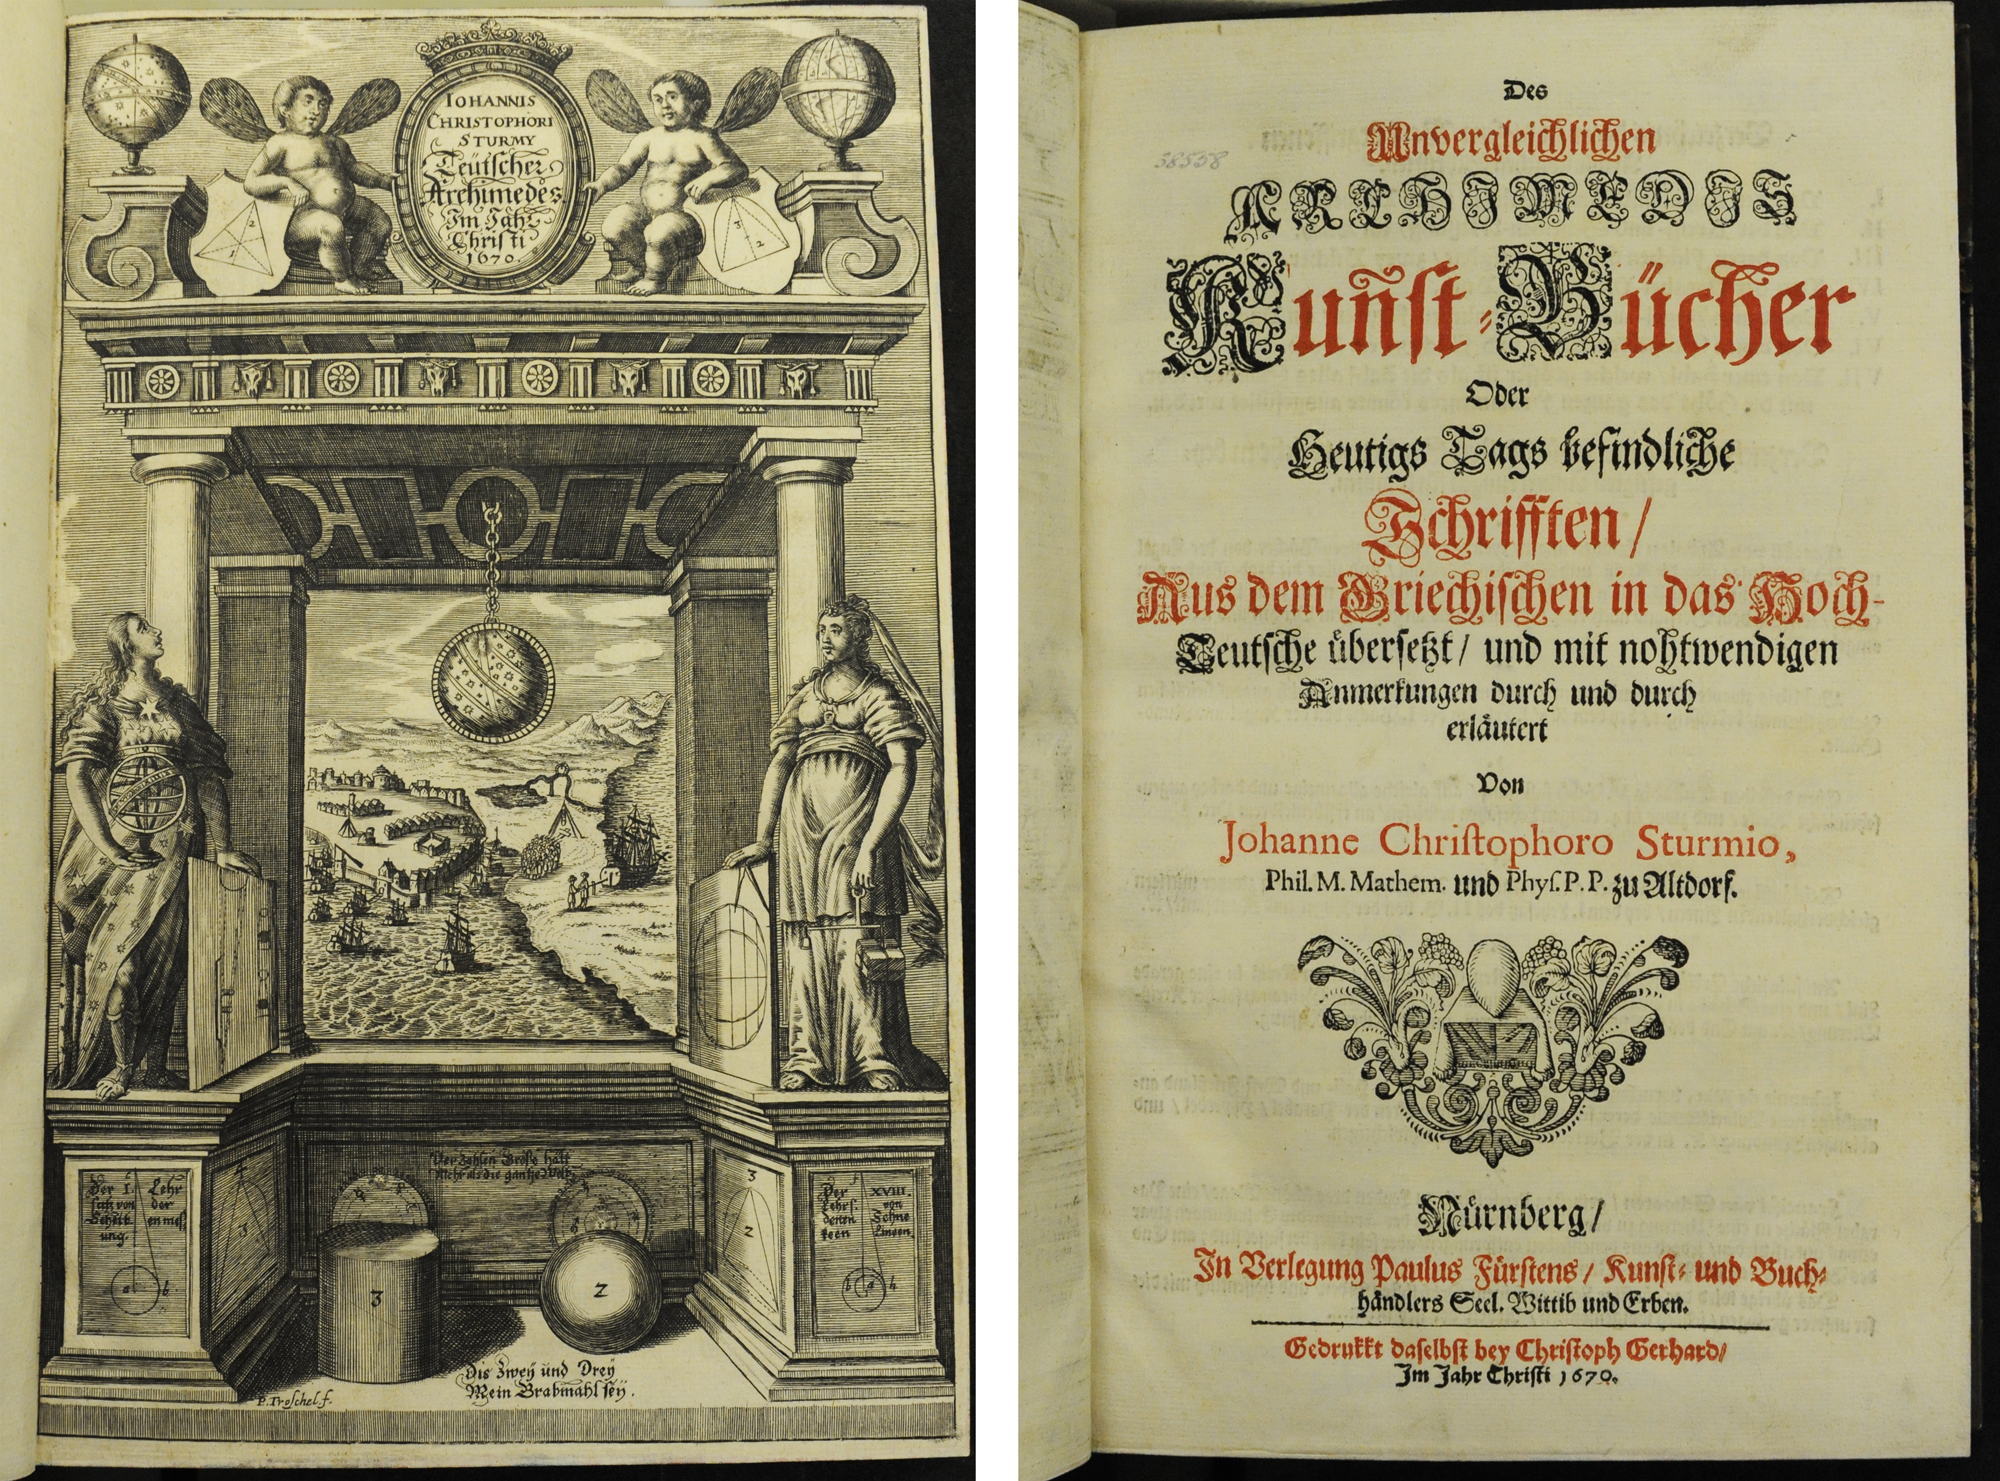 The two title pages of the 1670 Des unvergleichlichen Archimedis Kuñst-Bücher from the Mackay Collection